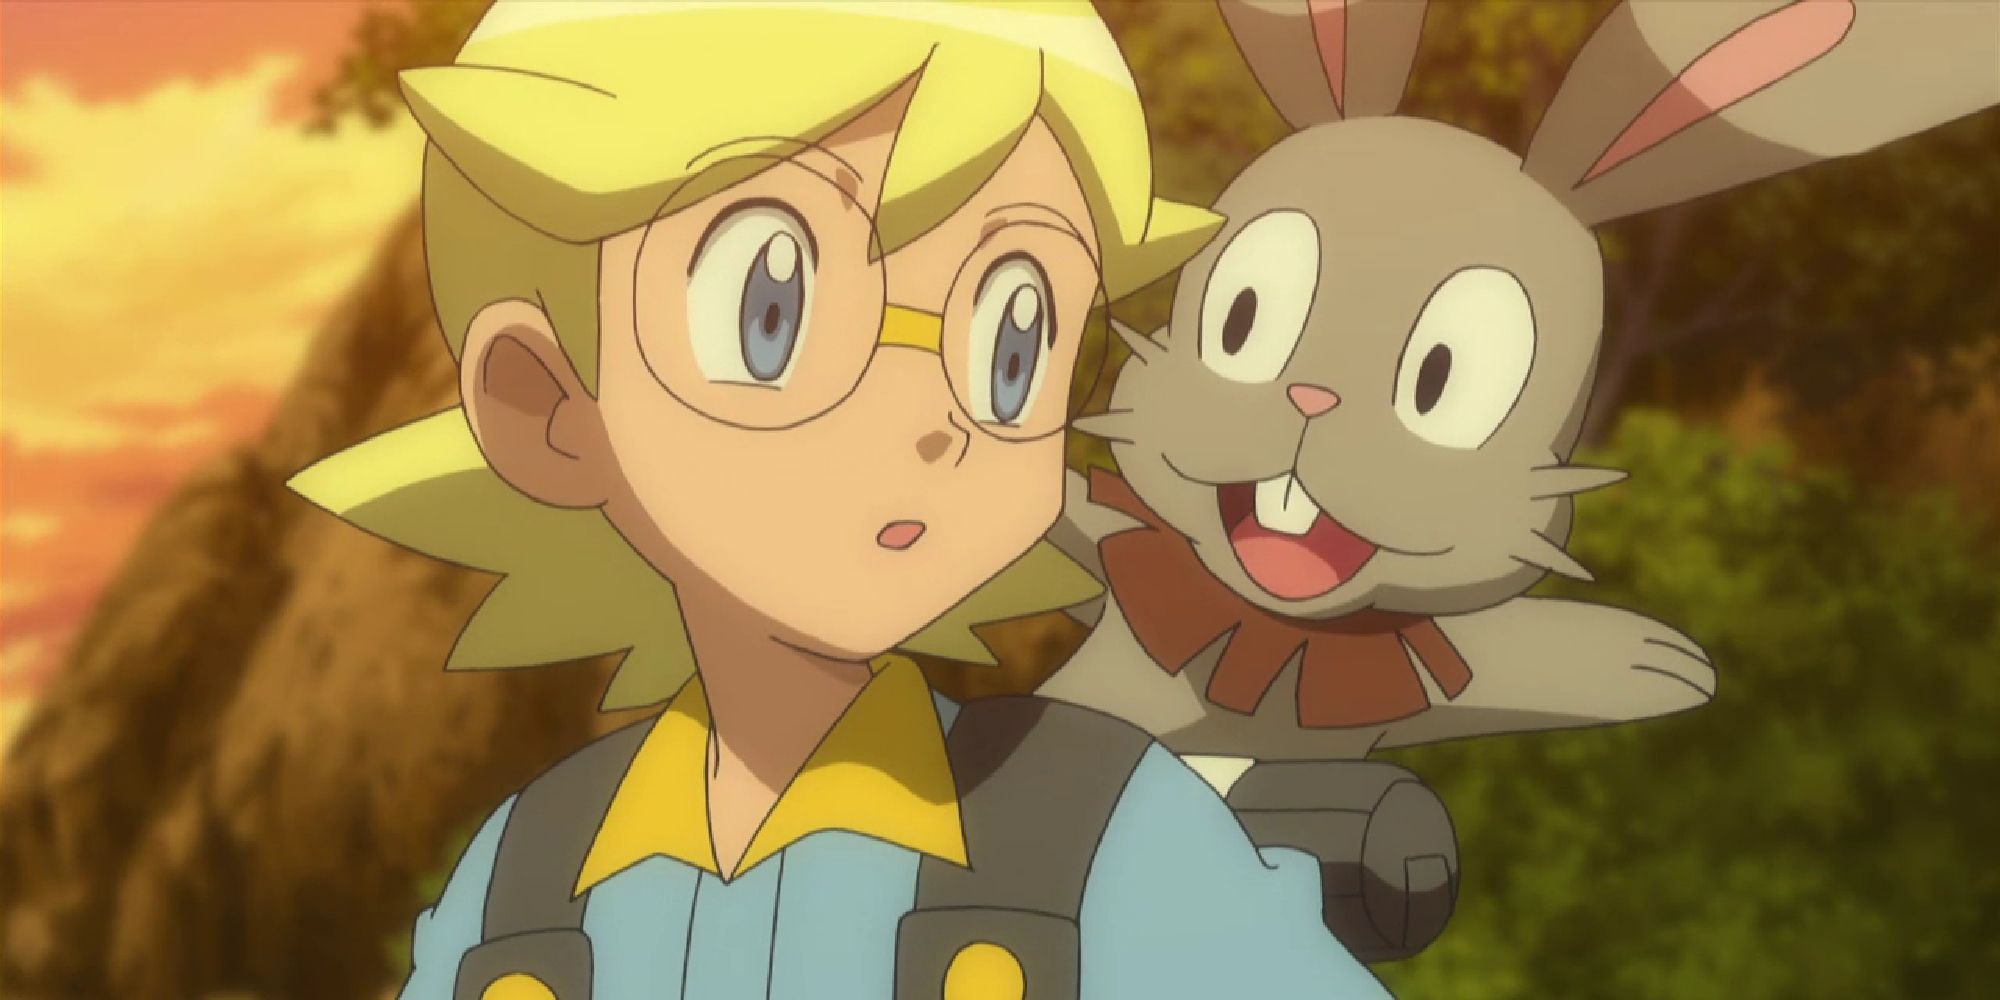 Clemont looking at Bunnelby on his shoulder